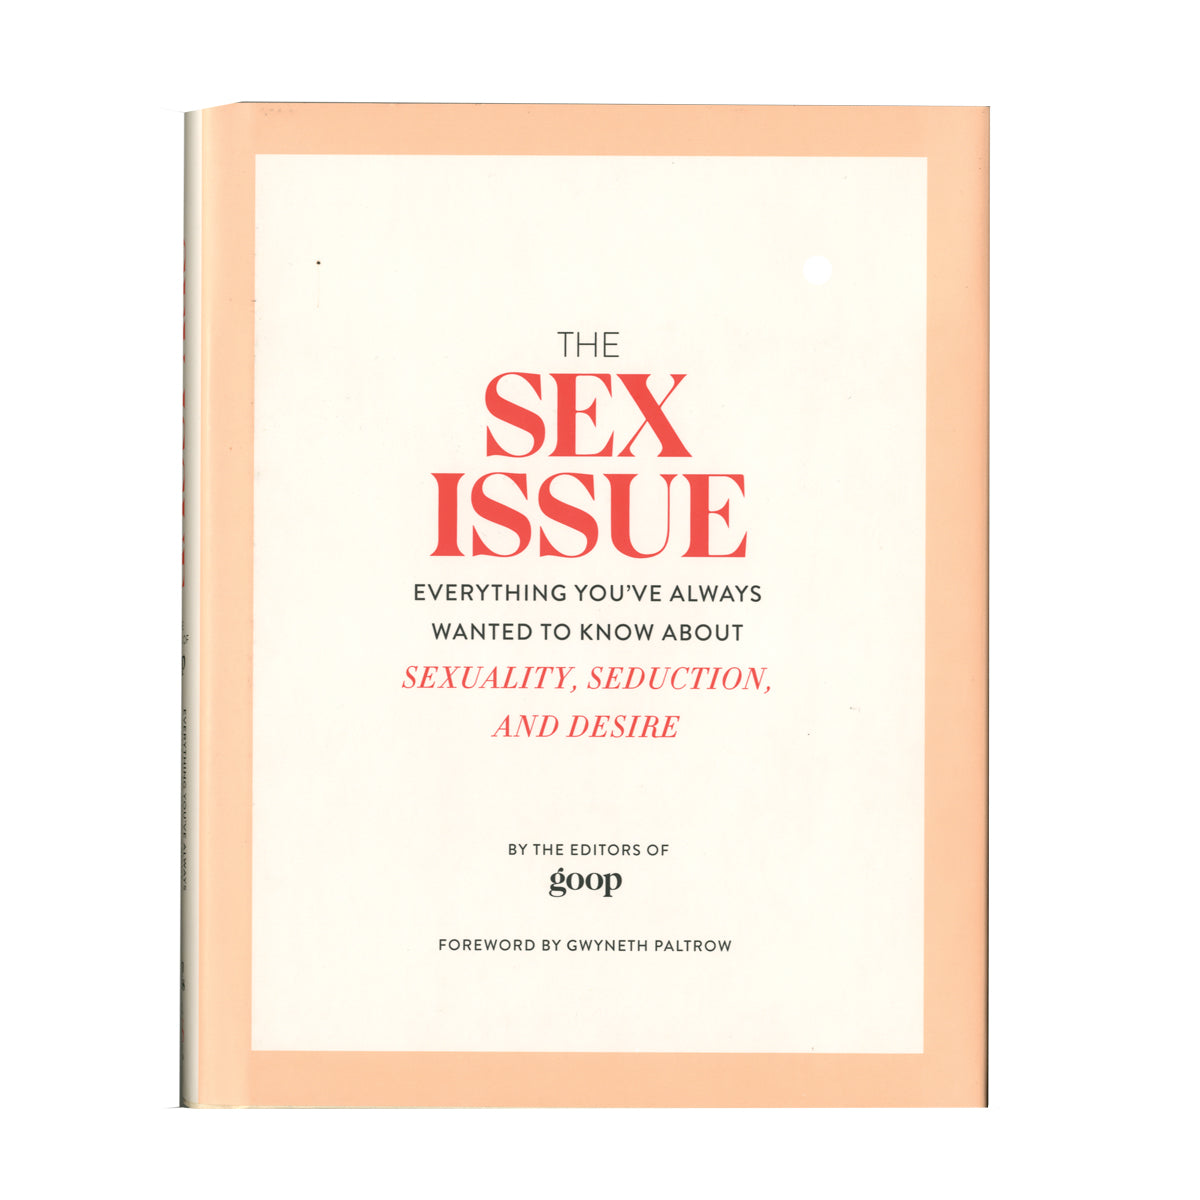 The Sex Issue - Everything You've Always Wanted To Know About Sexuality, Seduction, and Desire - Hatchette Book Group